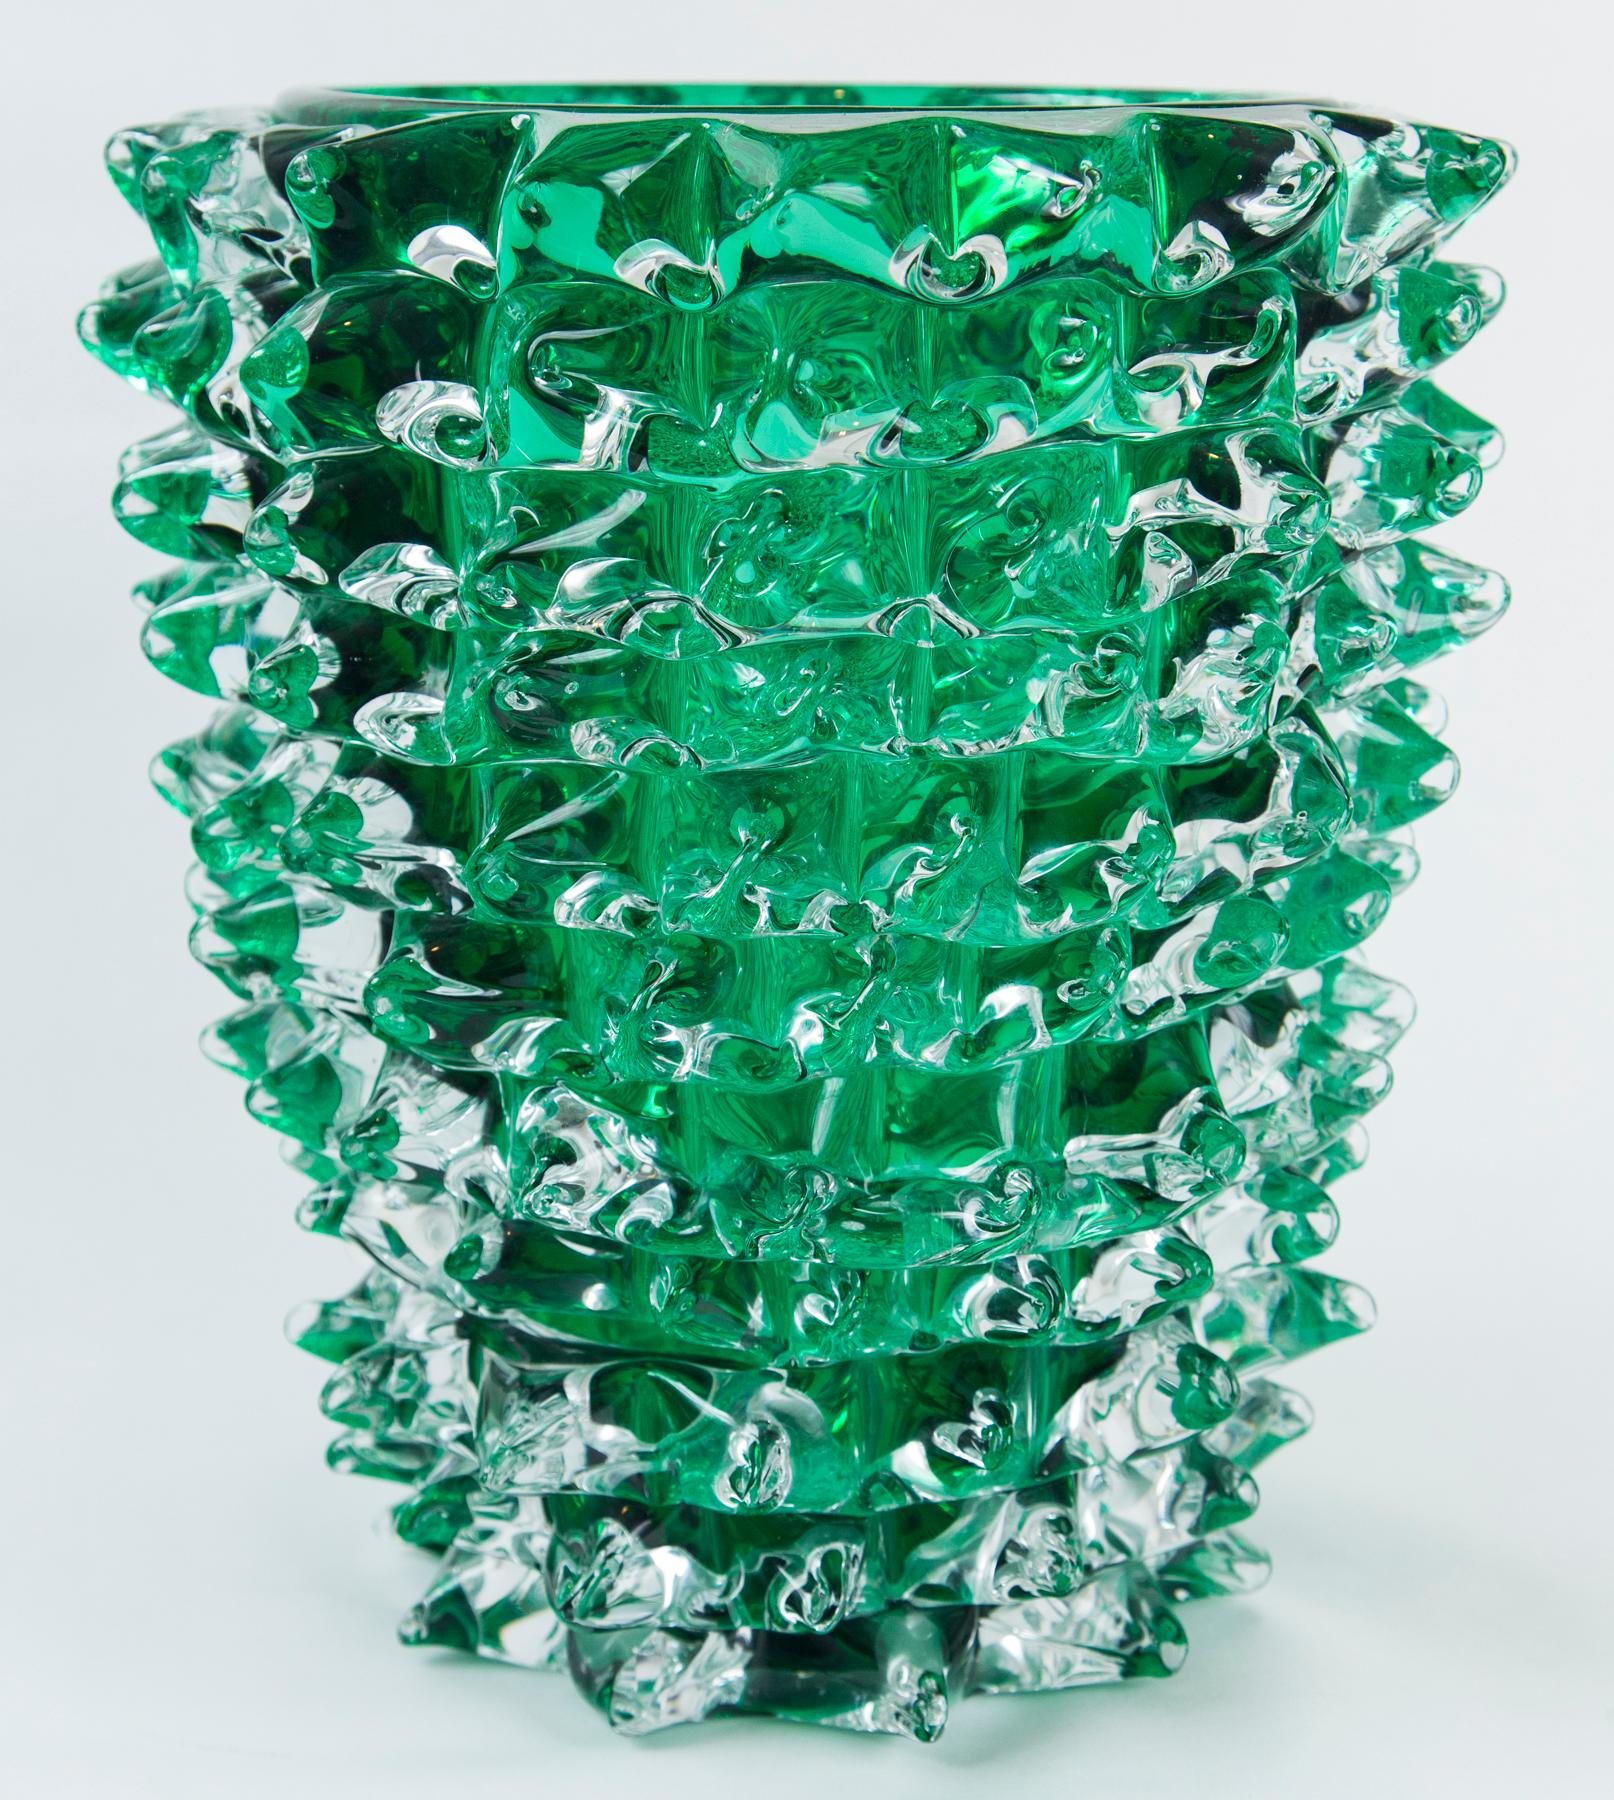 Paolo Crepax Murano Green Glass Vase For Sale 4